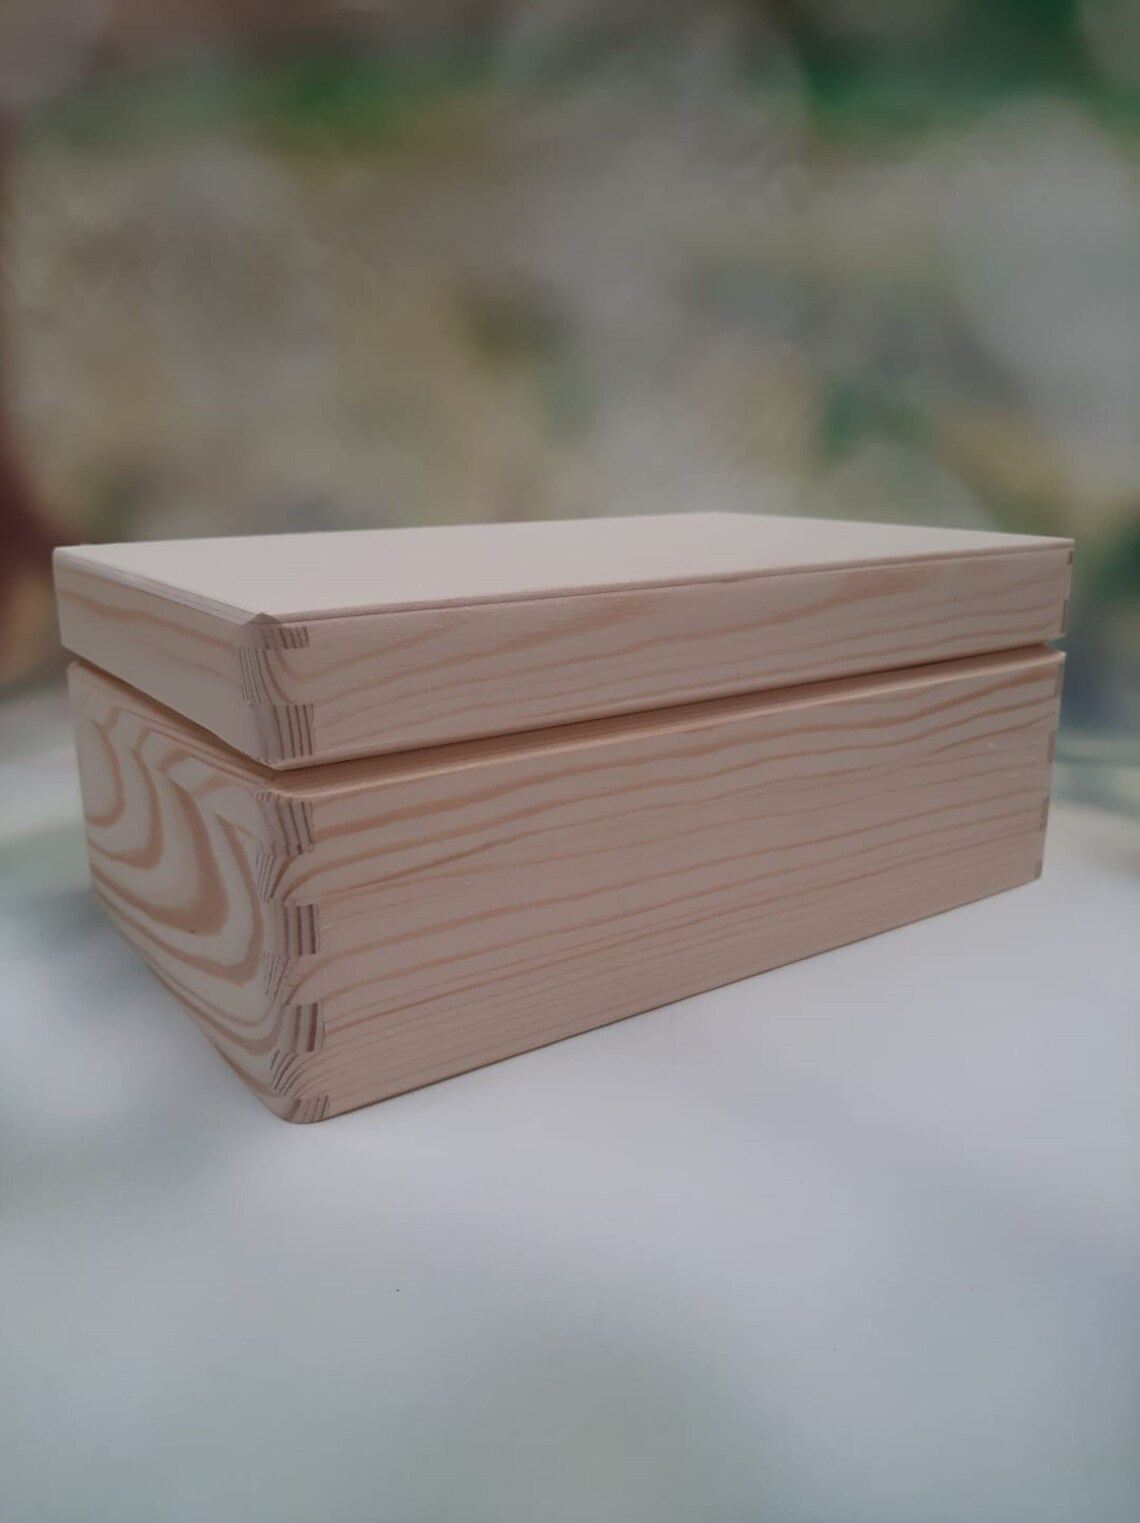 Small Plain Wooden Box - Side View